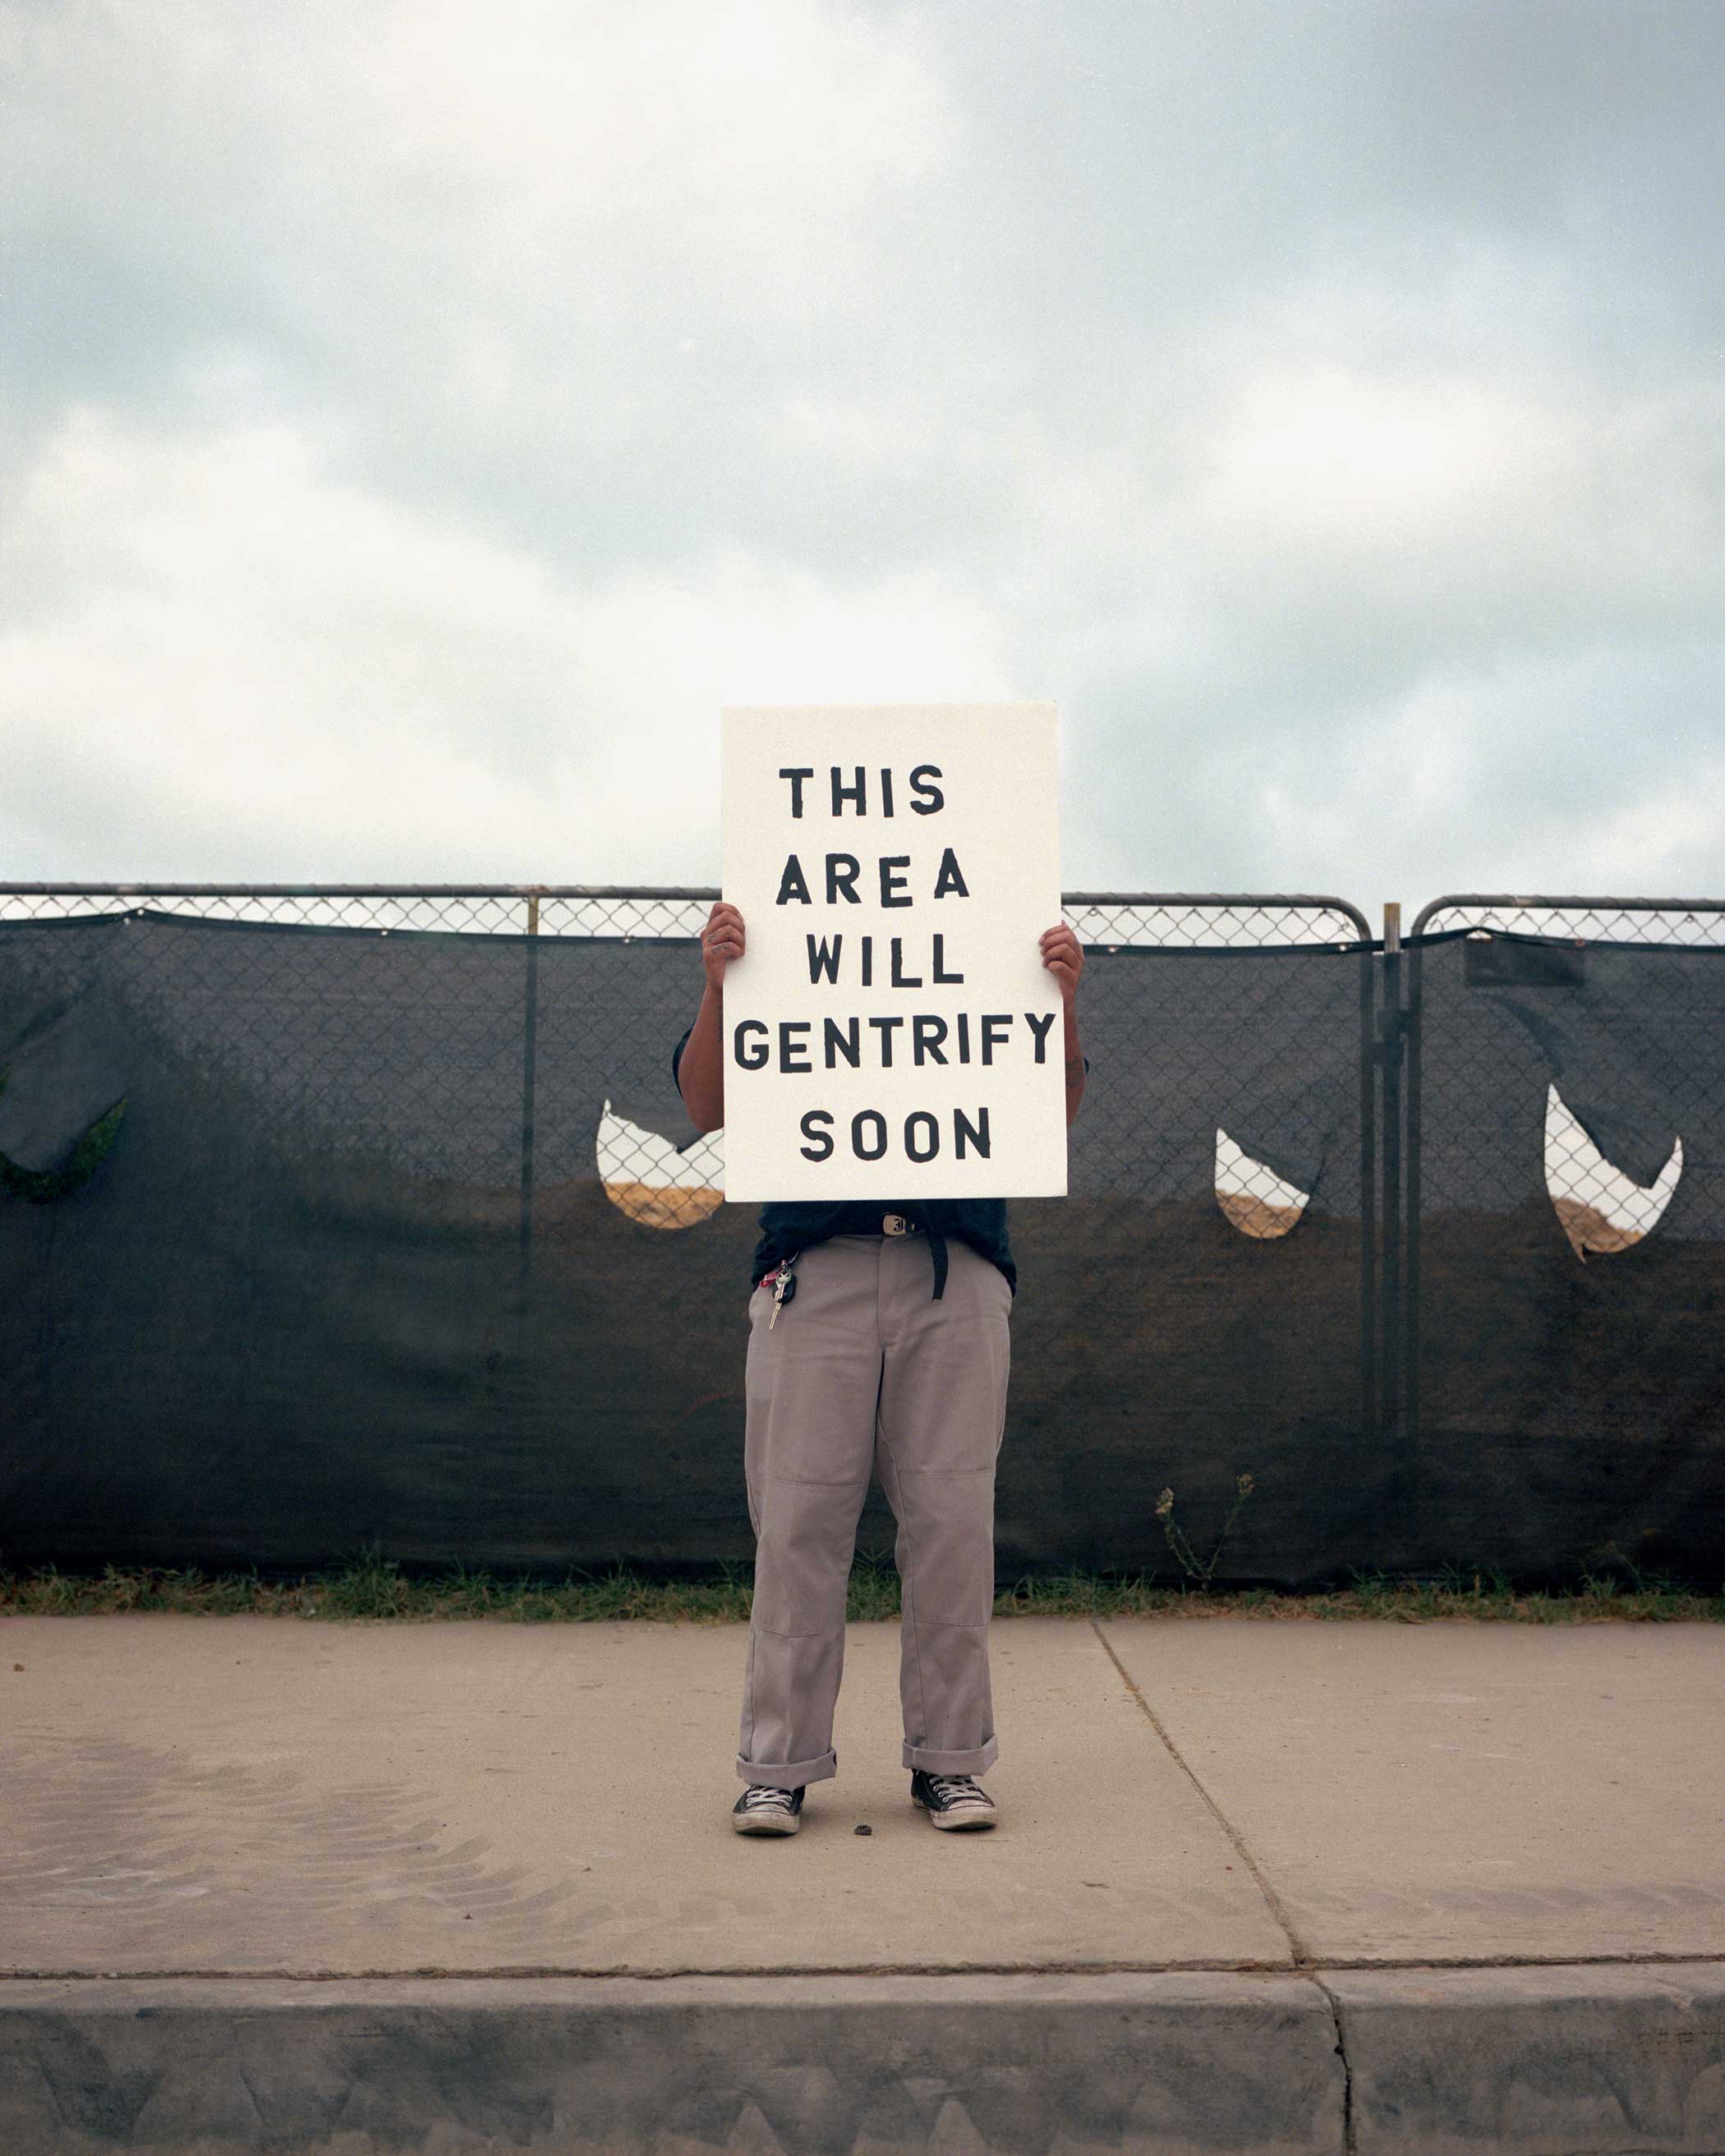 William Camargo, photography "We Gonna Have to Move Out Soon Fam!"  showing a person standing on a sidewalk infront of a fence. The white sign is covering the person's face and reads "This area will gentrify soon"